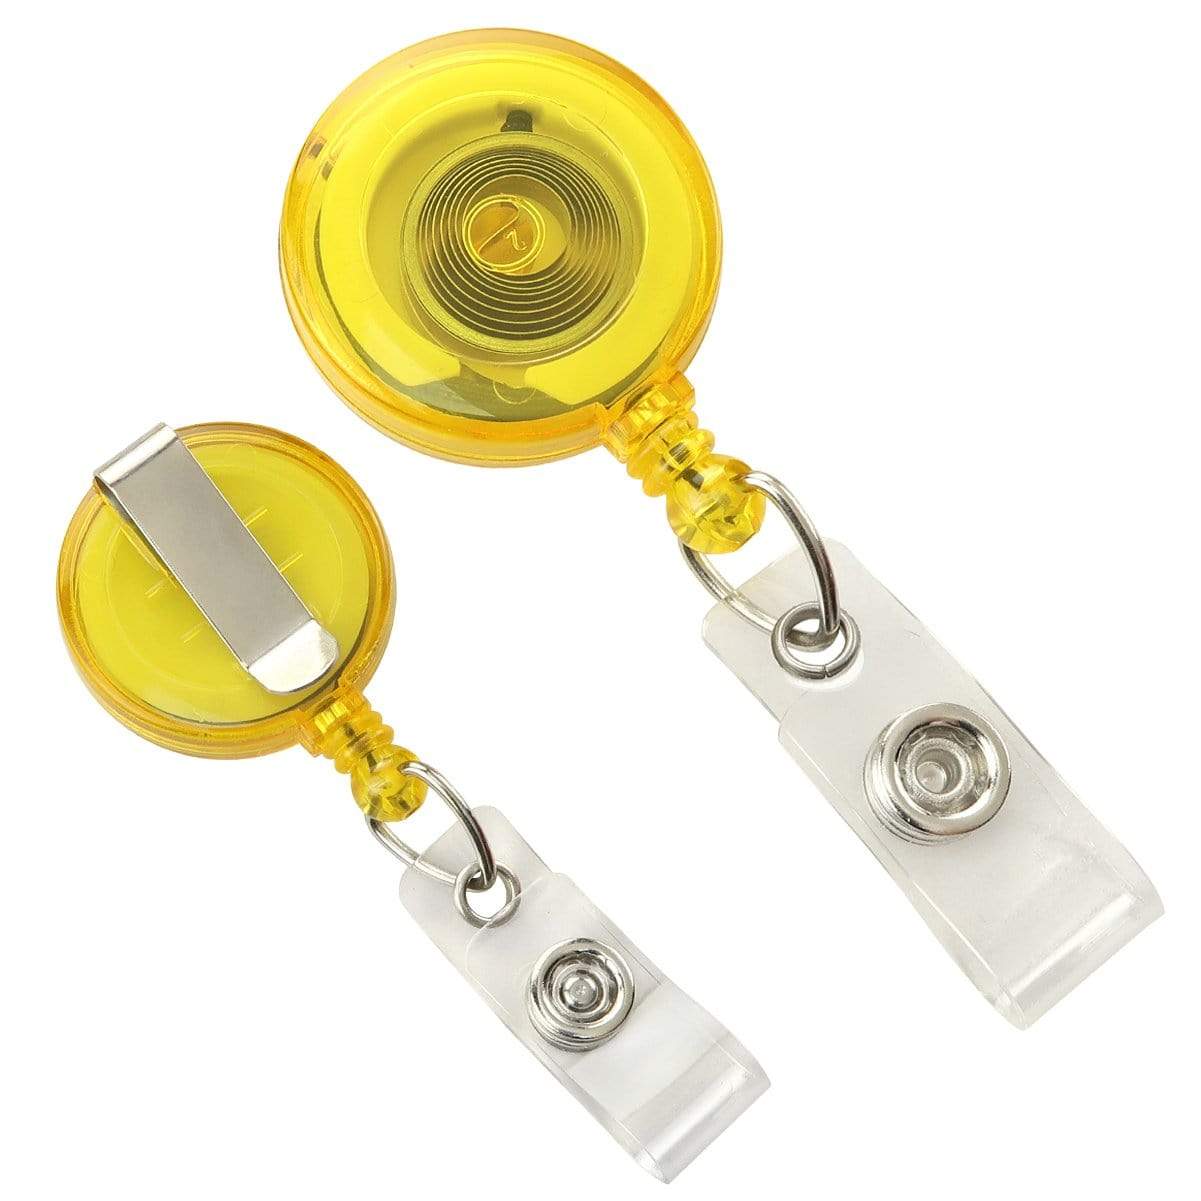 Translucent Yellow Translucent Retractable Badge Reel With Belt Clip (P/N 2120-360X) 2120-3609